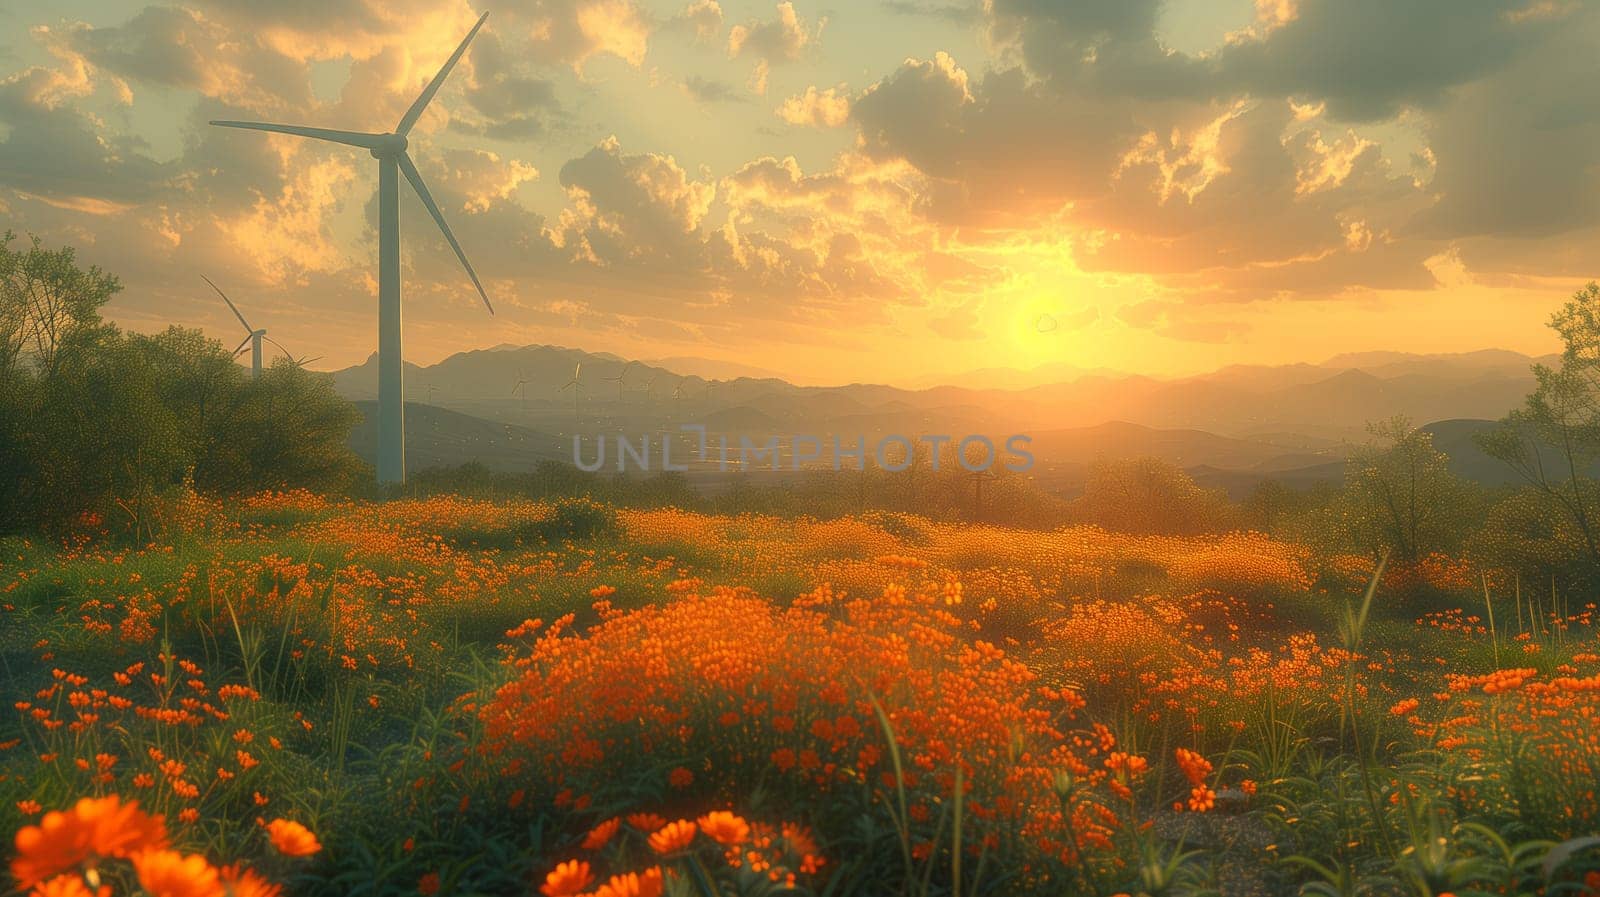 A picturesque landscape with a field of flowers under a vibrant sky, featuring a wind turbine silhouette at sunset